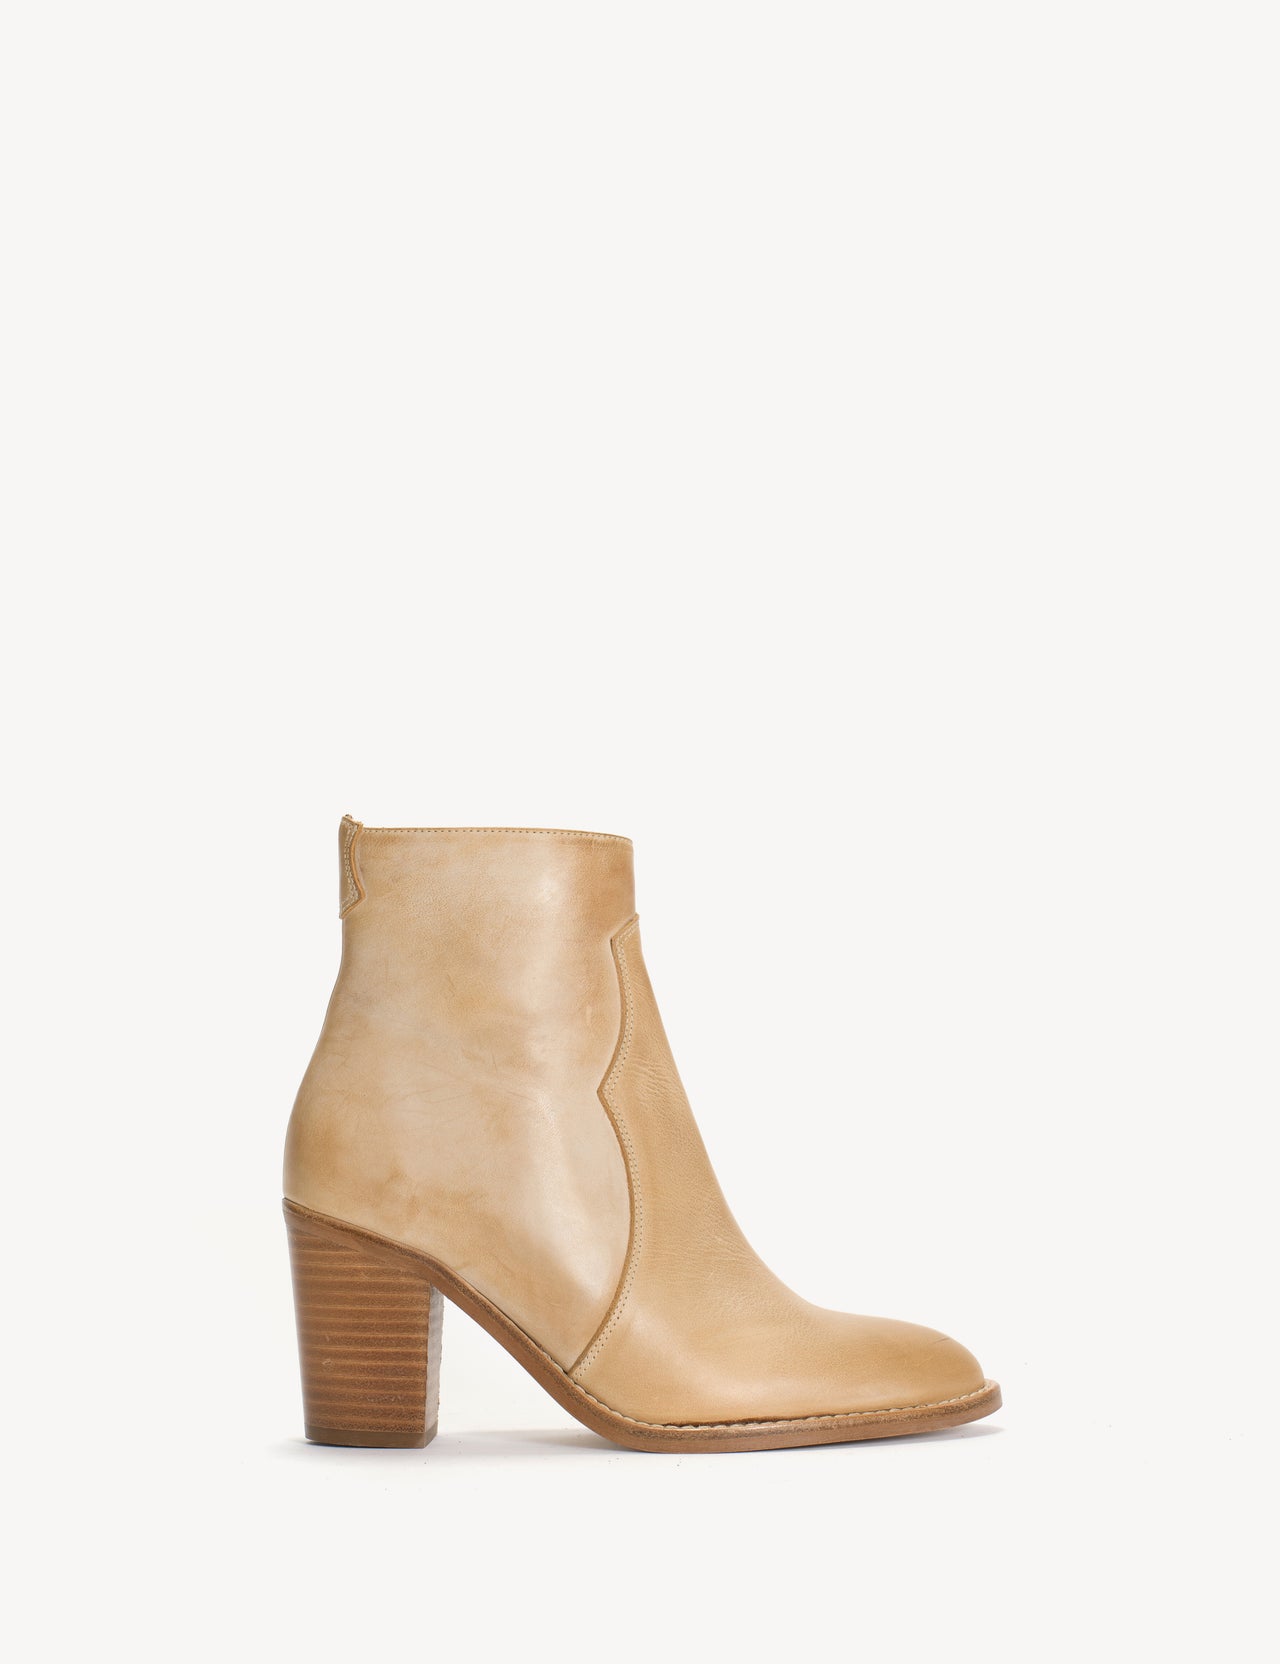 Jeanet Boot In Light Tan Escovado Leather